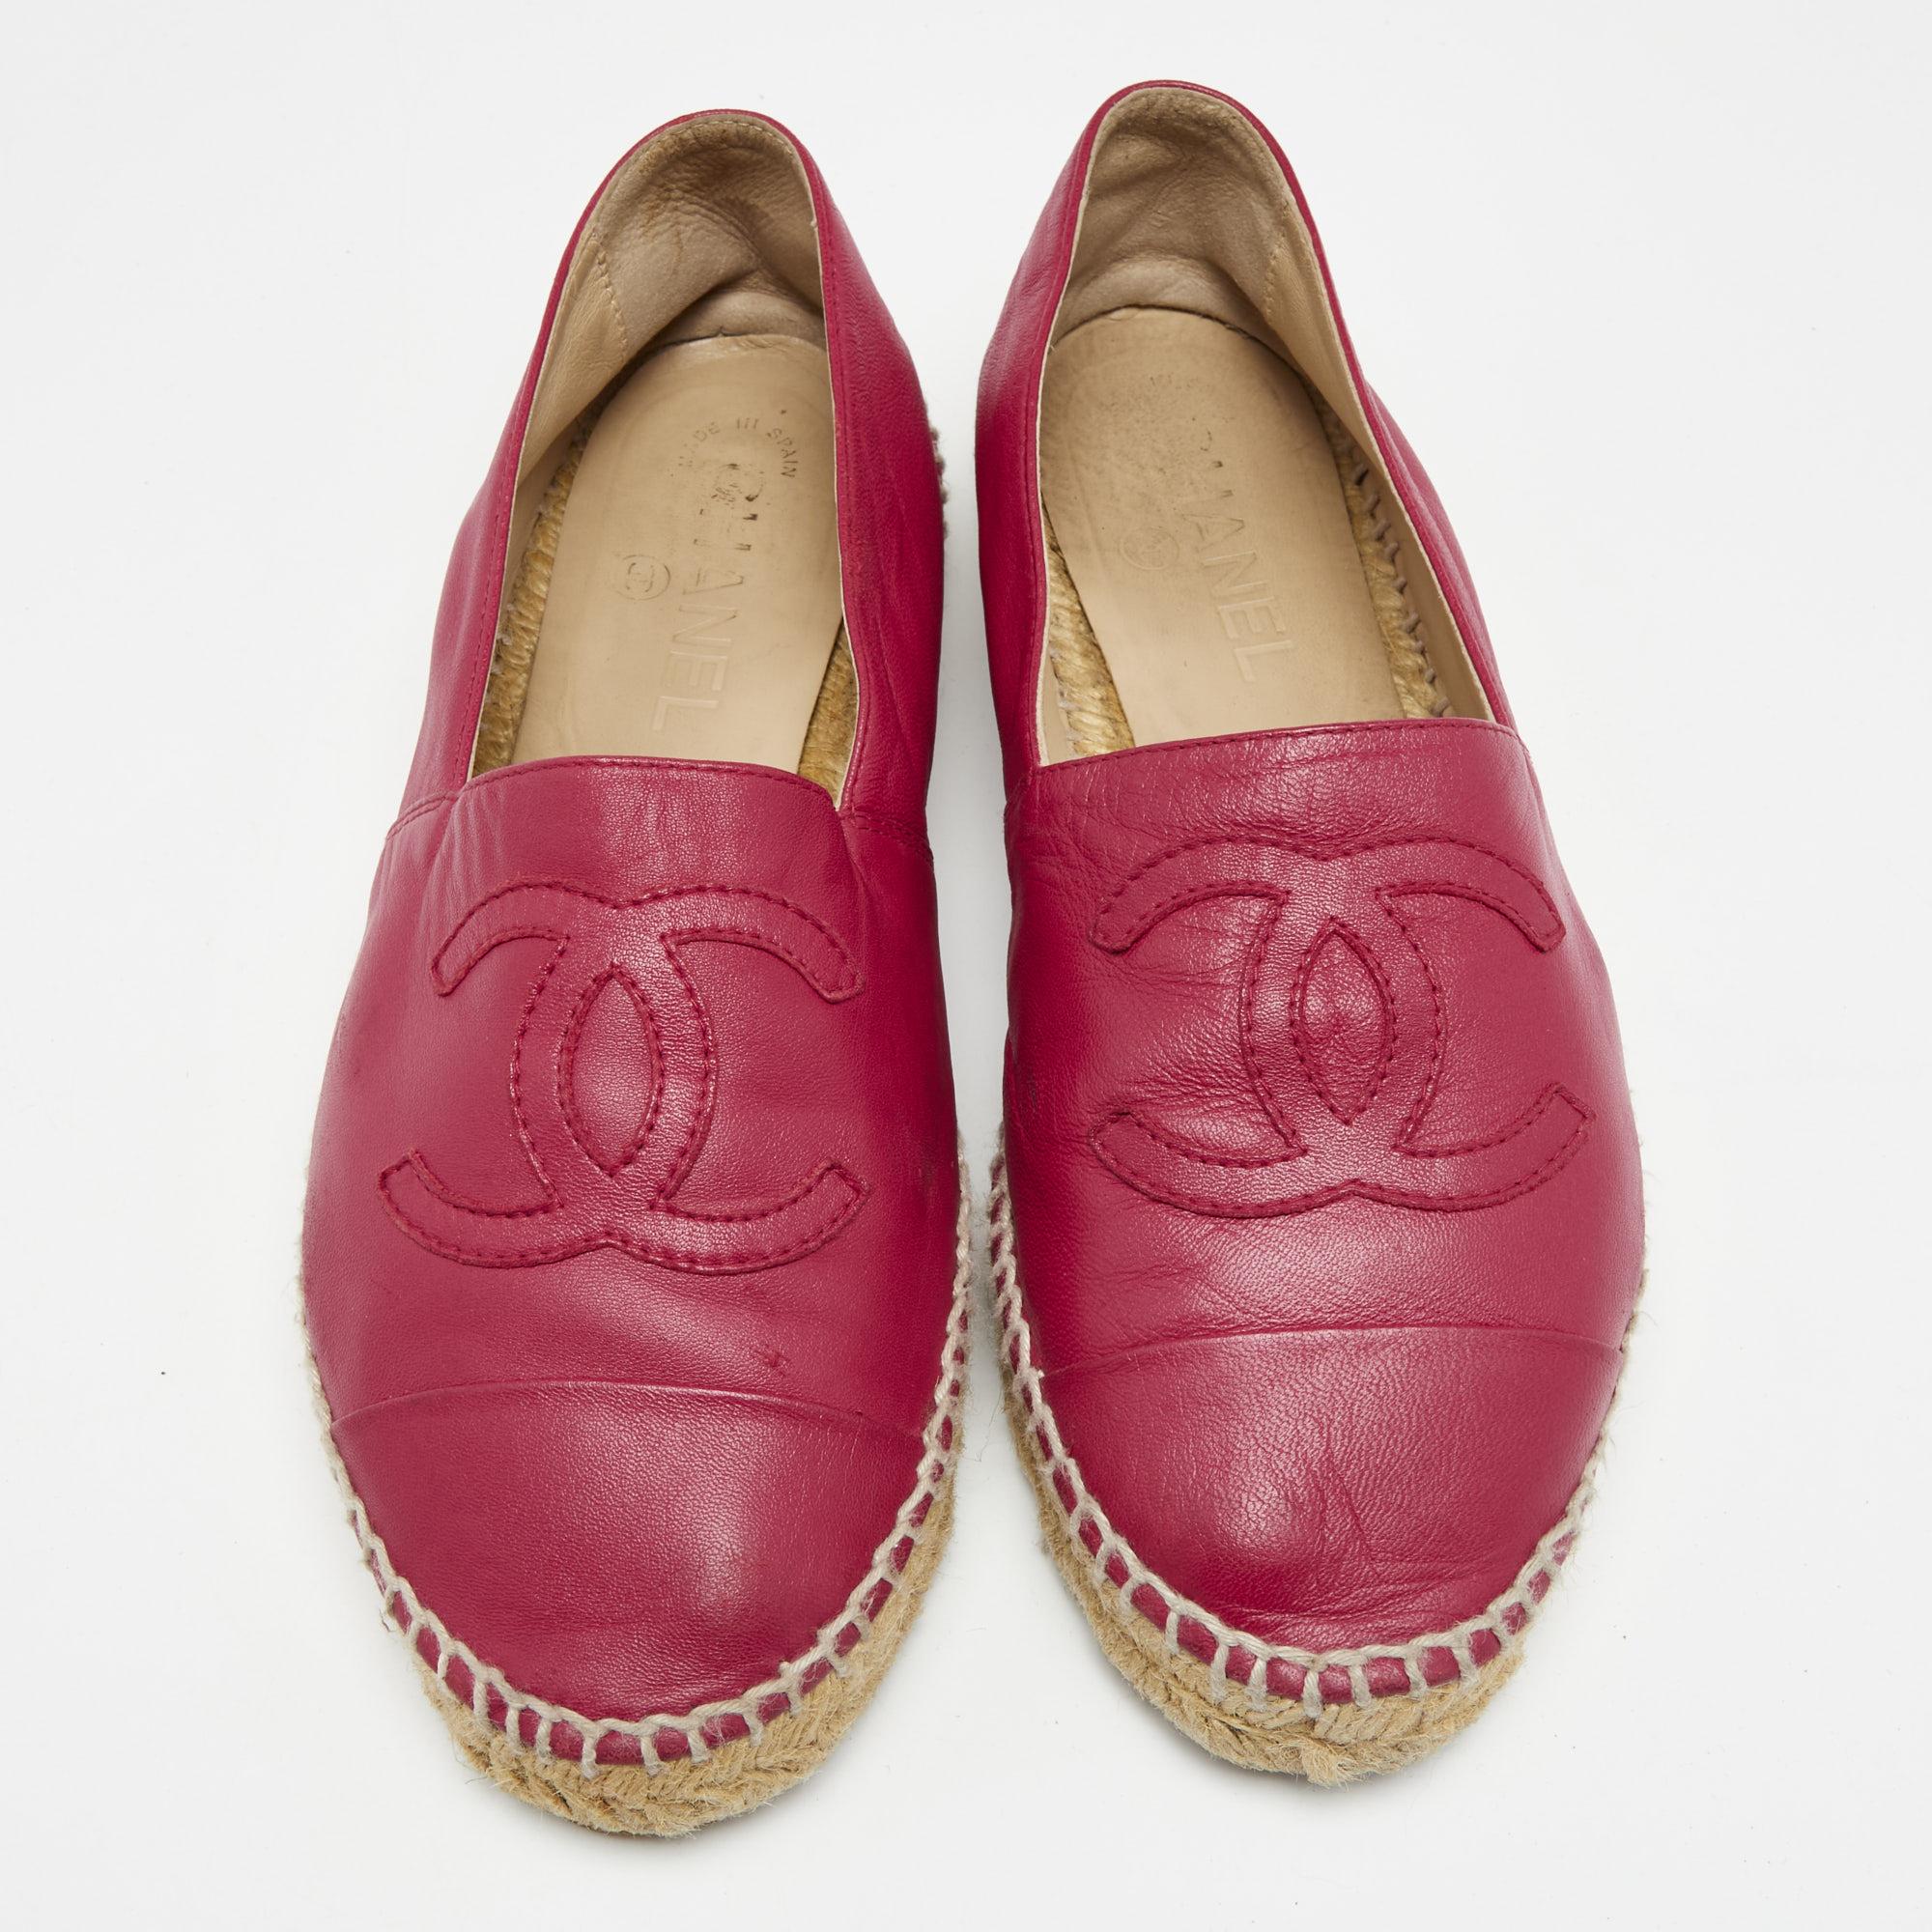 Chanel shoes are known for their unique designs that emanate the label's feminine verve and immaculate craftsmanship that makes their creations last season after season. Crafted from leather, these espadrille flats are a great combination of style